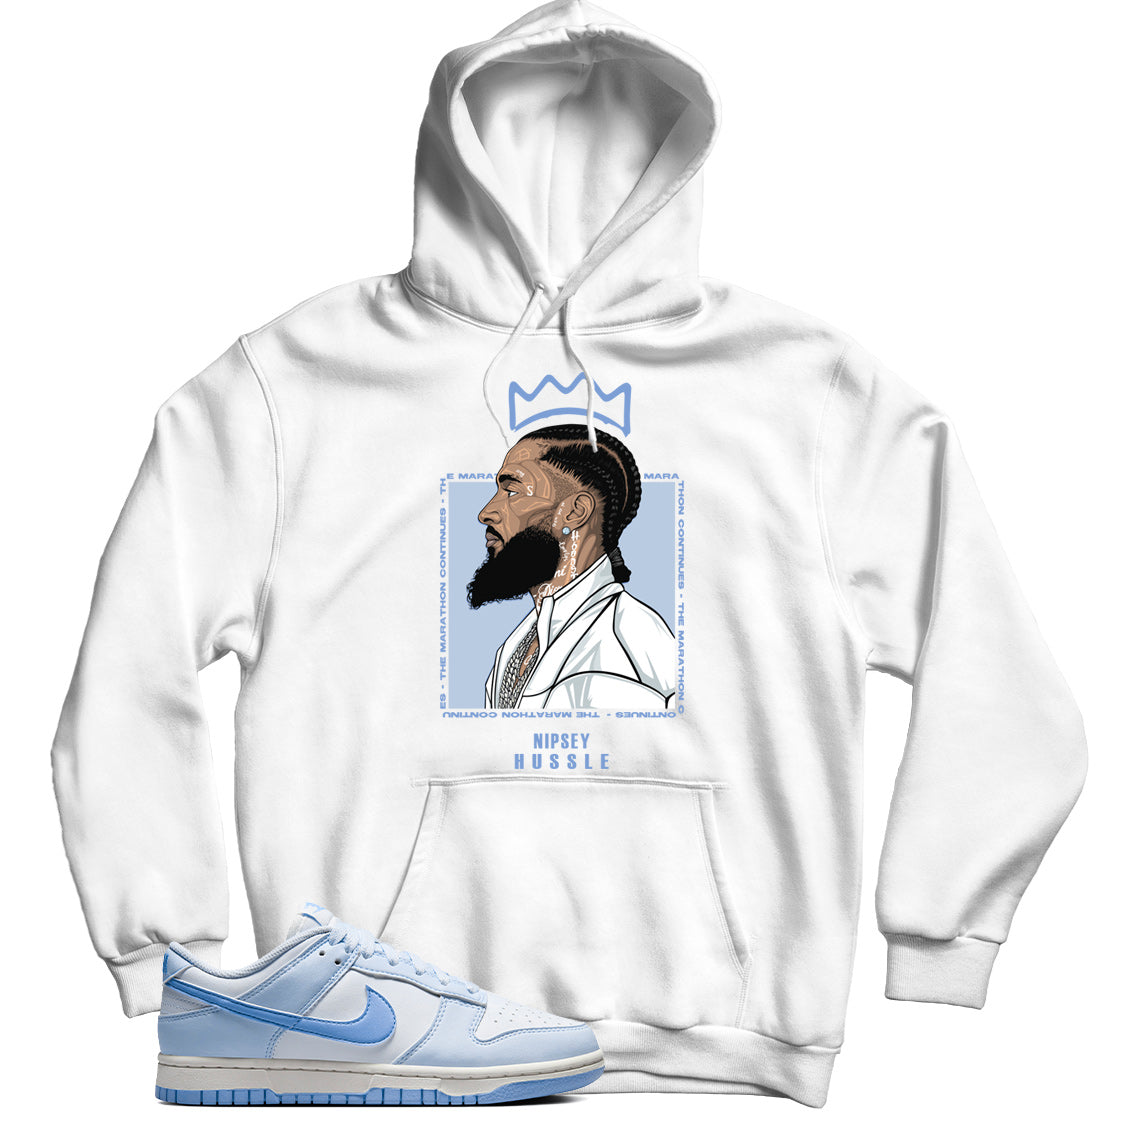 Dunk Low Blue Tint hoodie